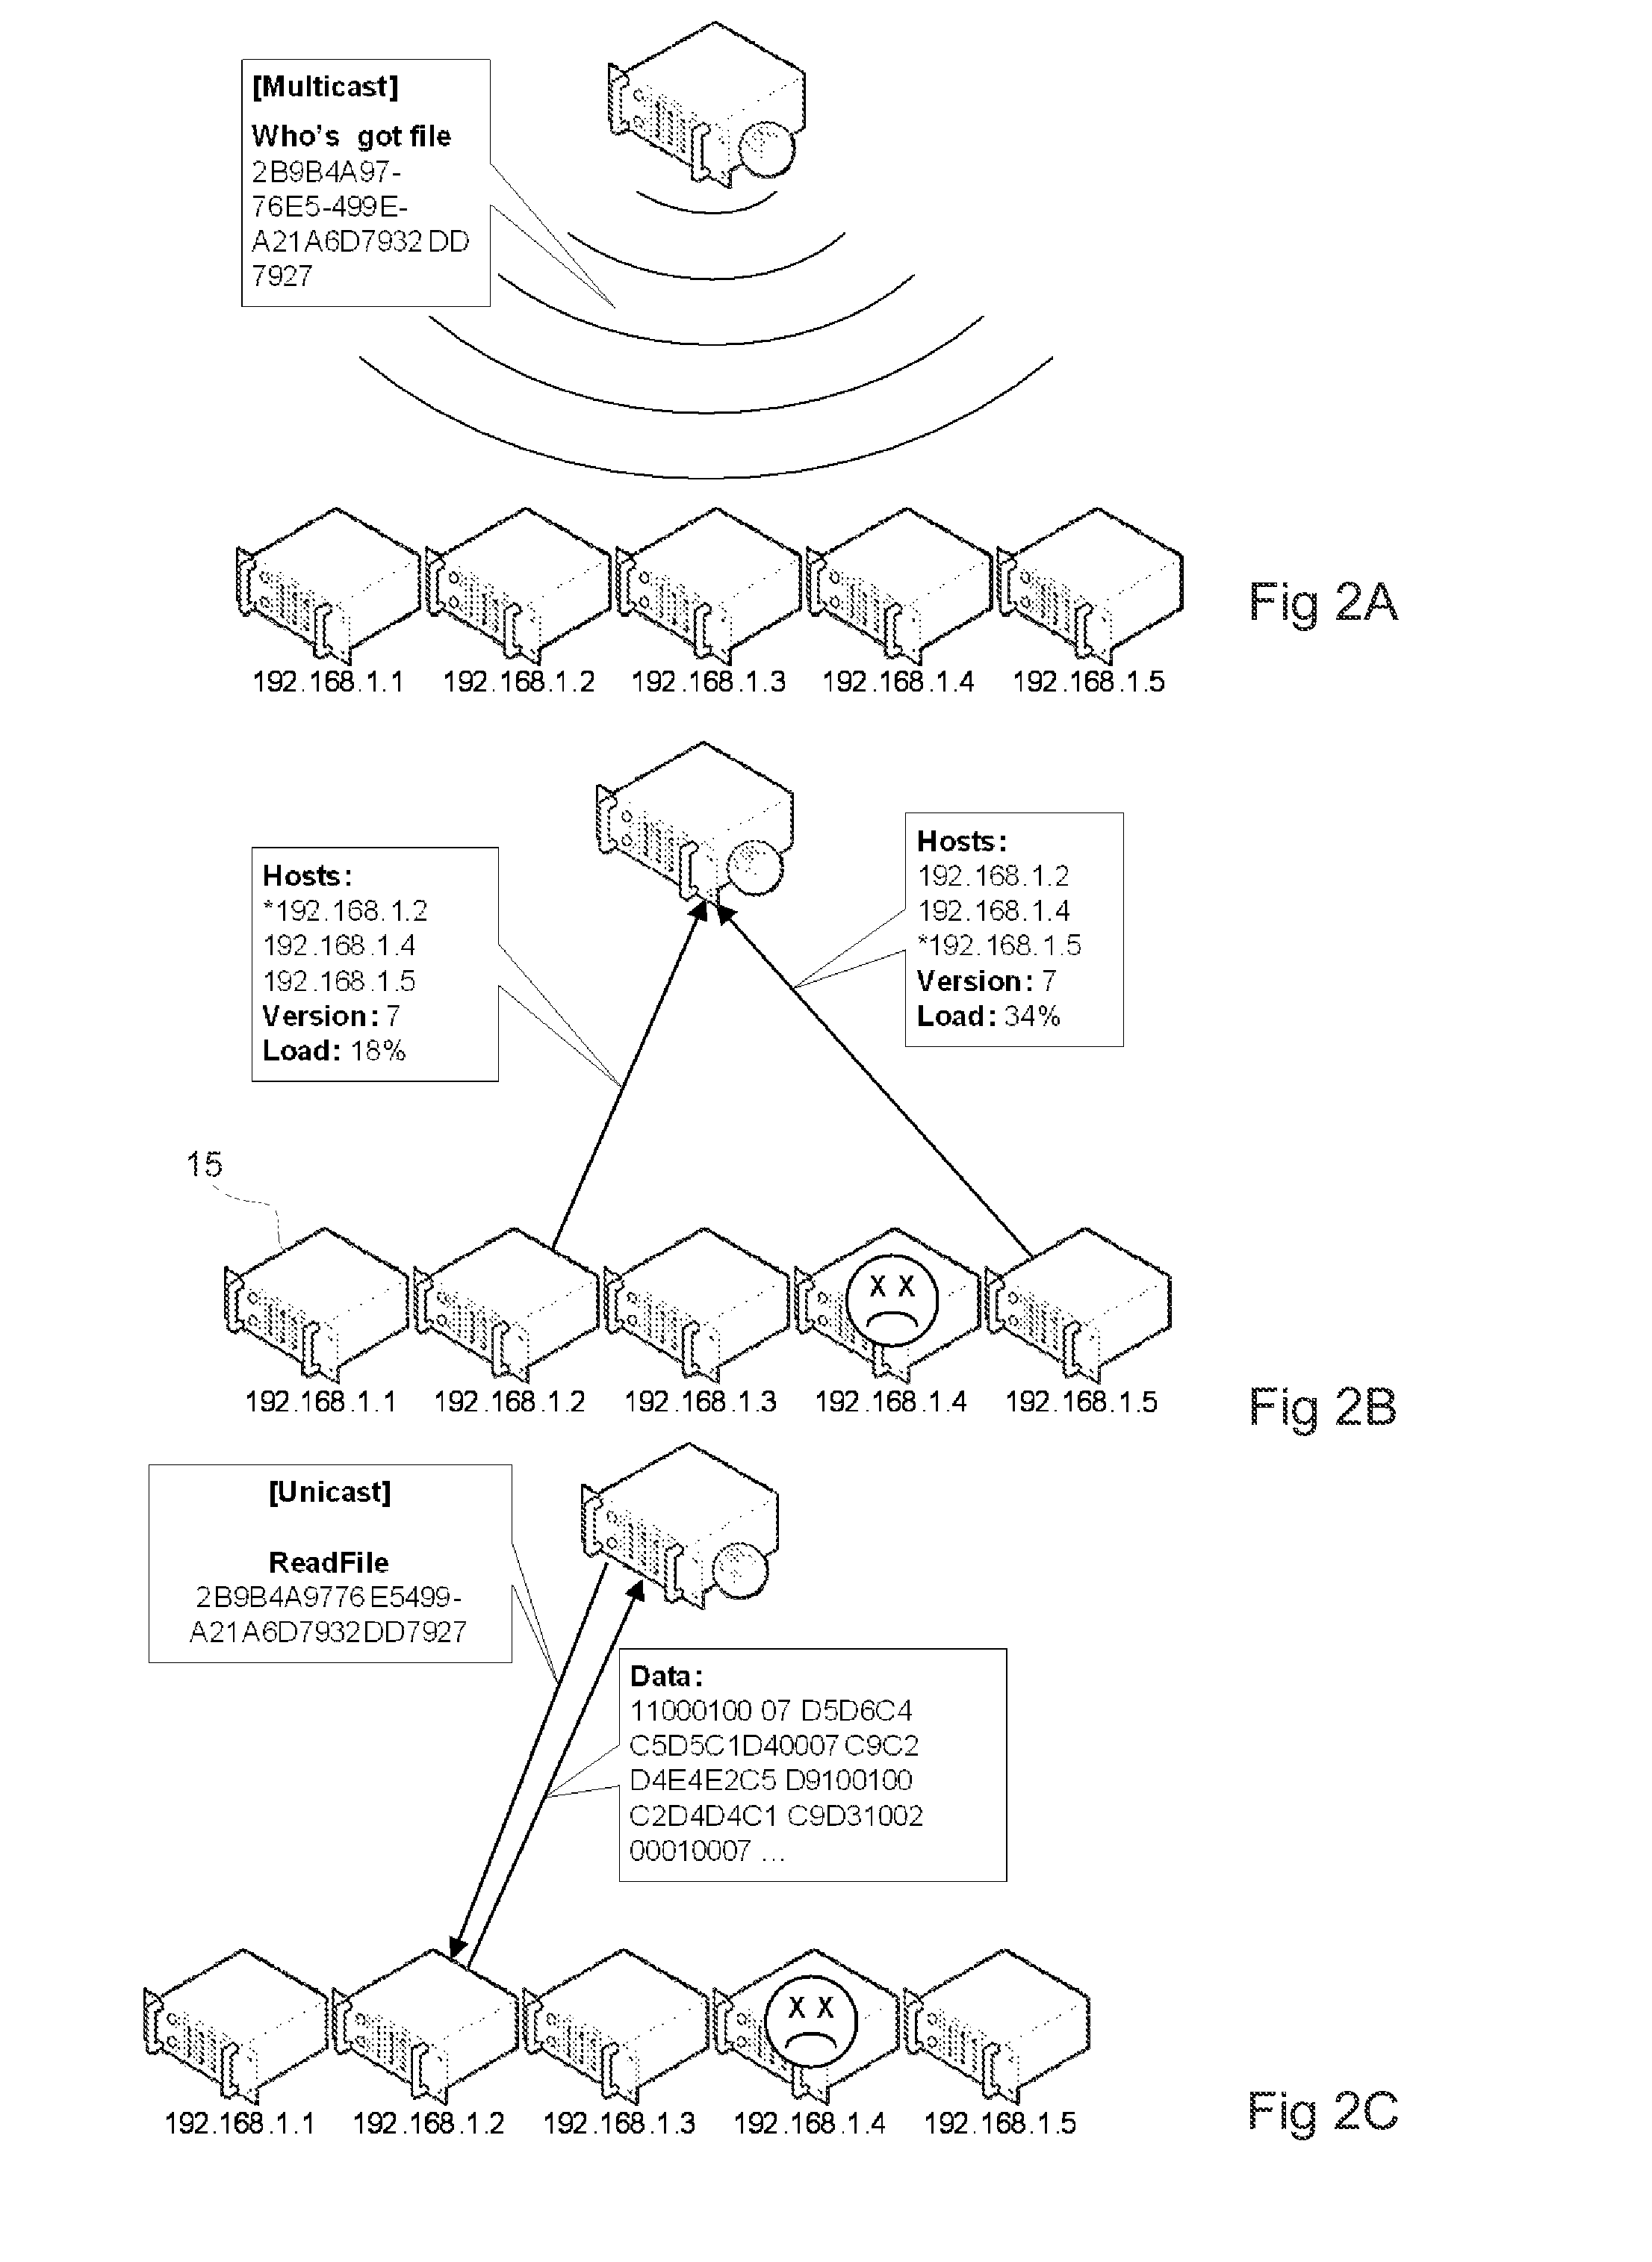 Method And Device For Writing Data To A Data Storage System Comprising A Plurality Of Data Storage Nodes